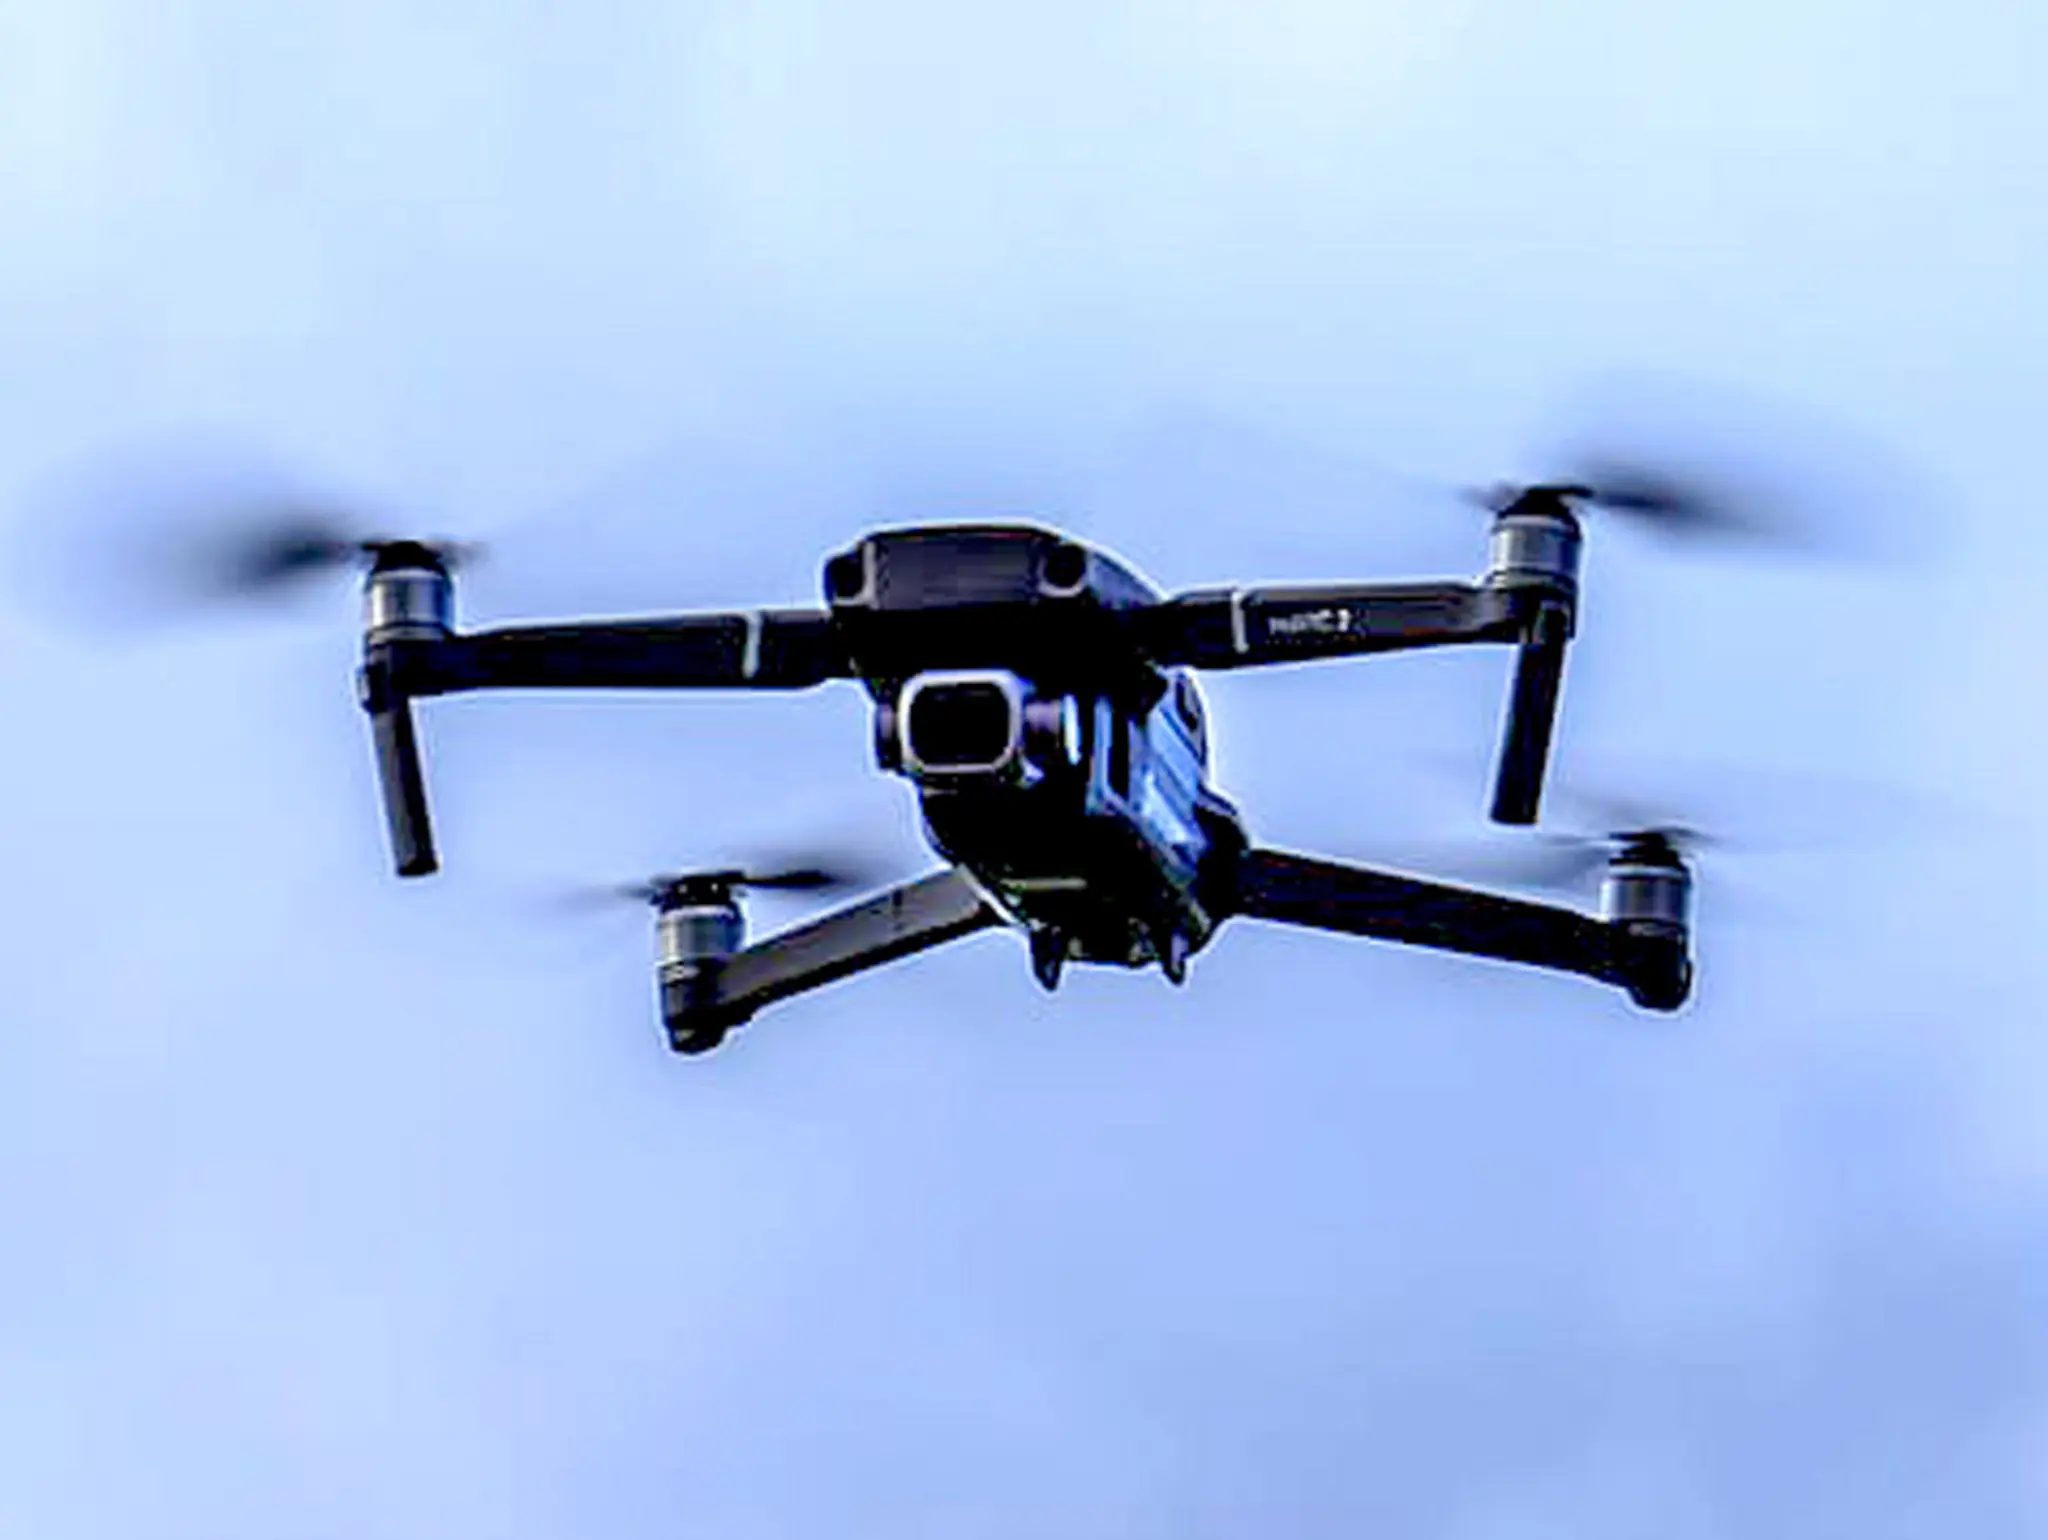 The Risk and Insurance of Unmanned Aircraft